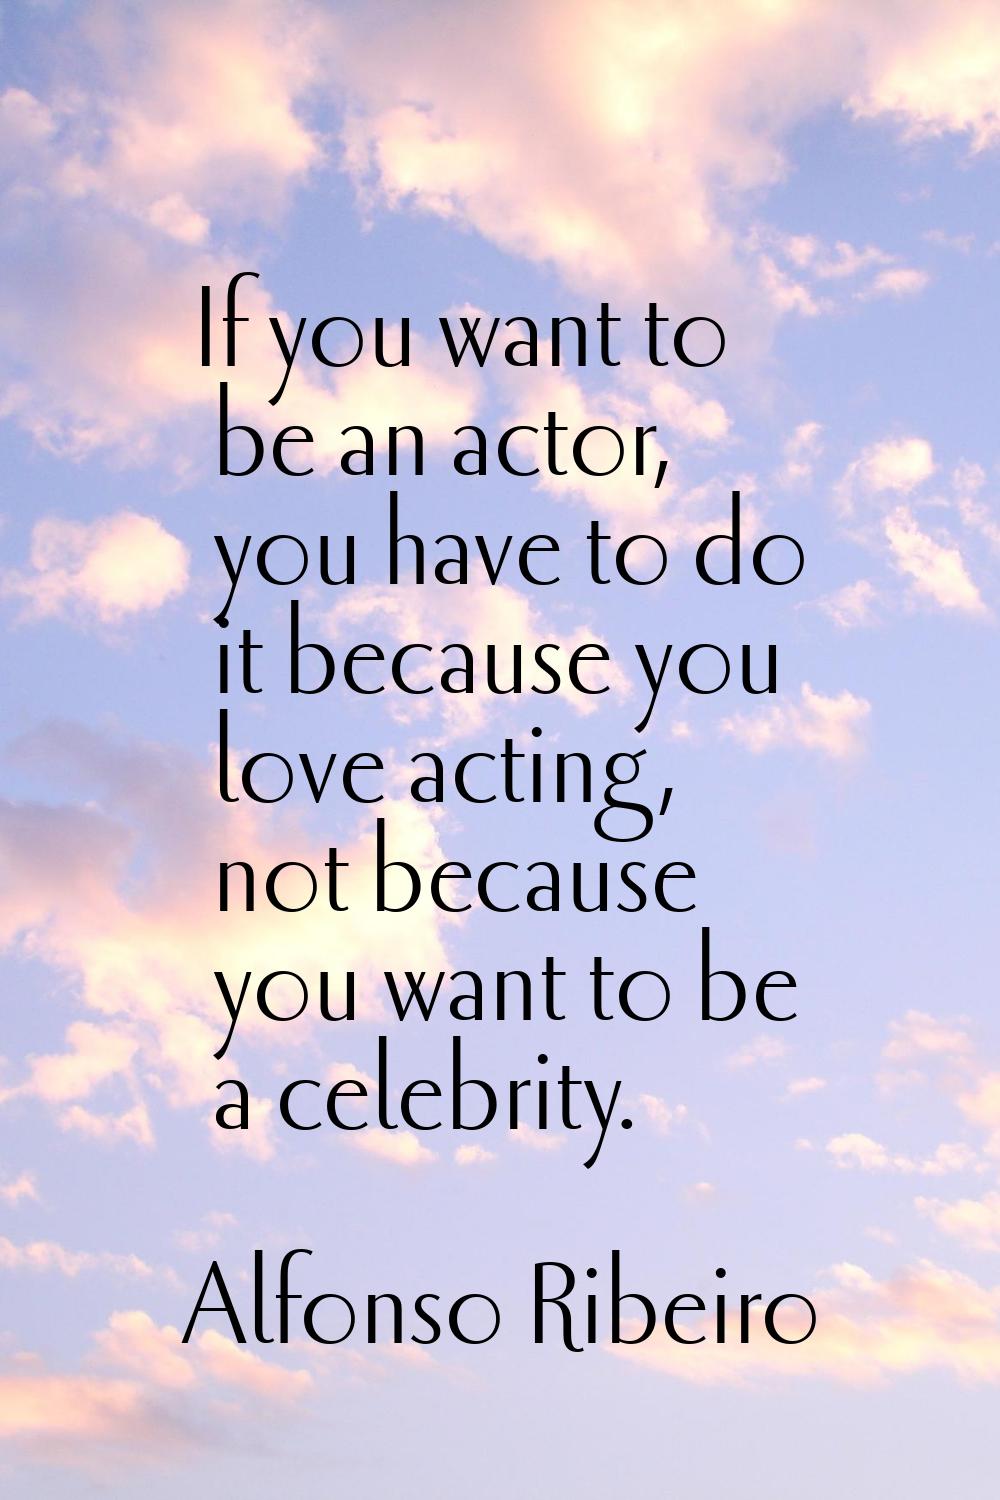 If you want to be an actor, you have to do it because you love acting, not because you want to be a